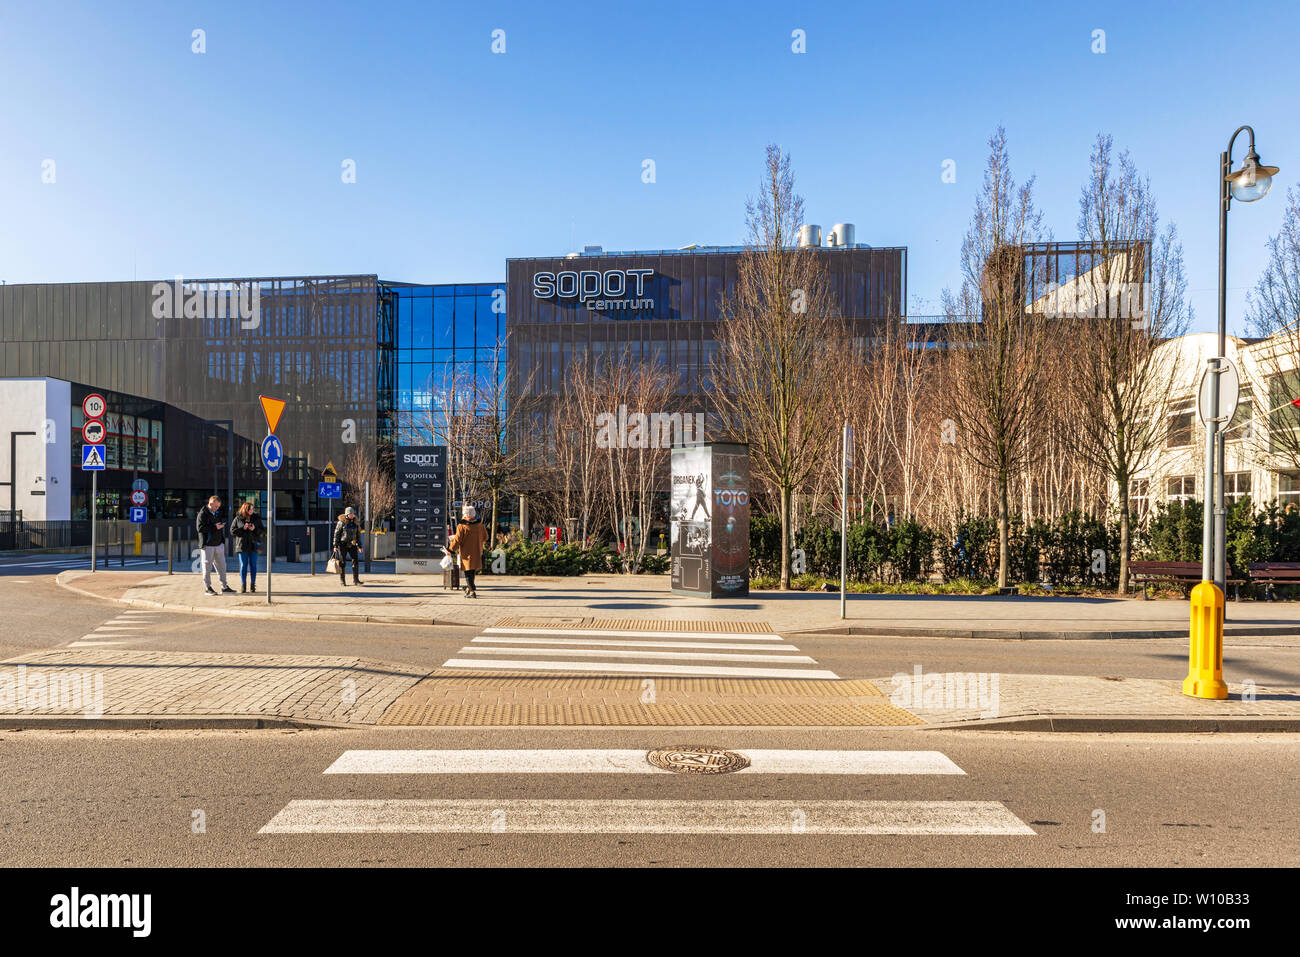 Sopot, Poland - Feb 16, 2019: View at the modern main building of the railway station in Sopot, Poland Stock Photo